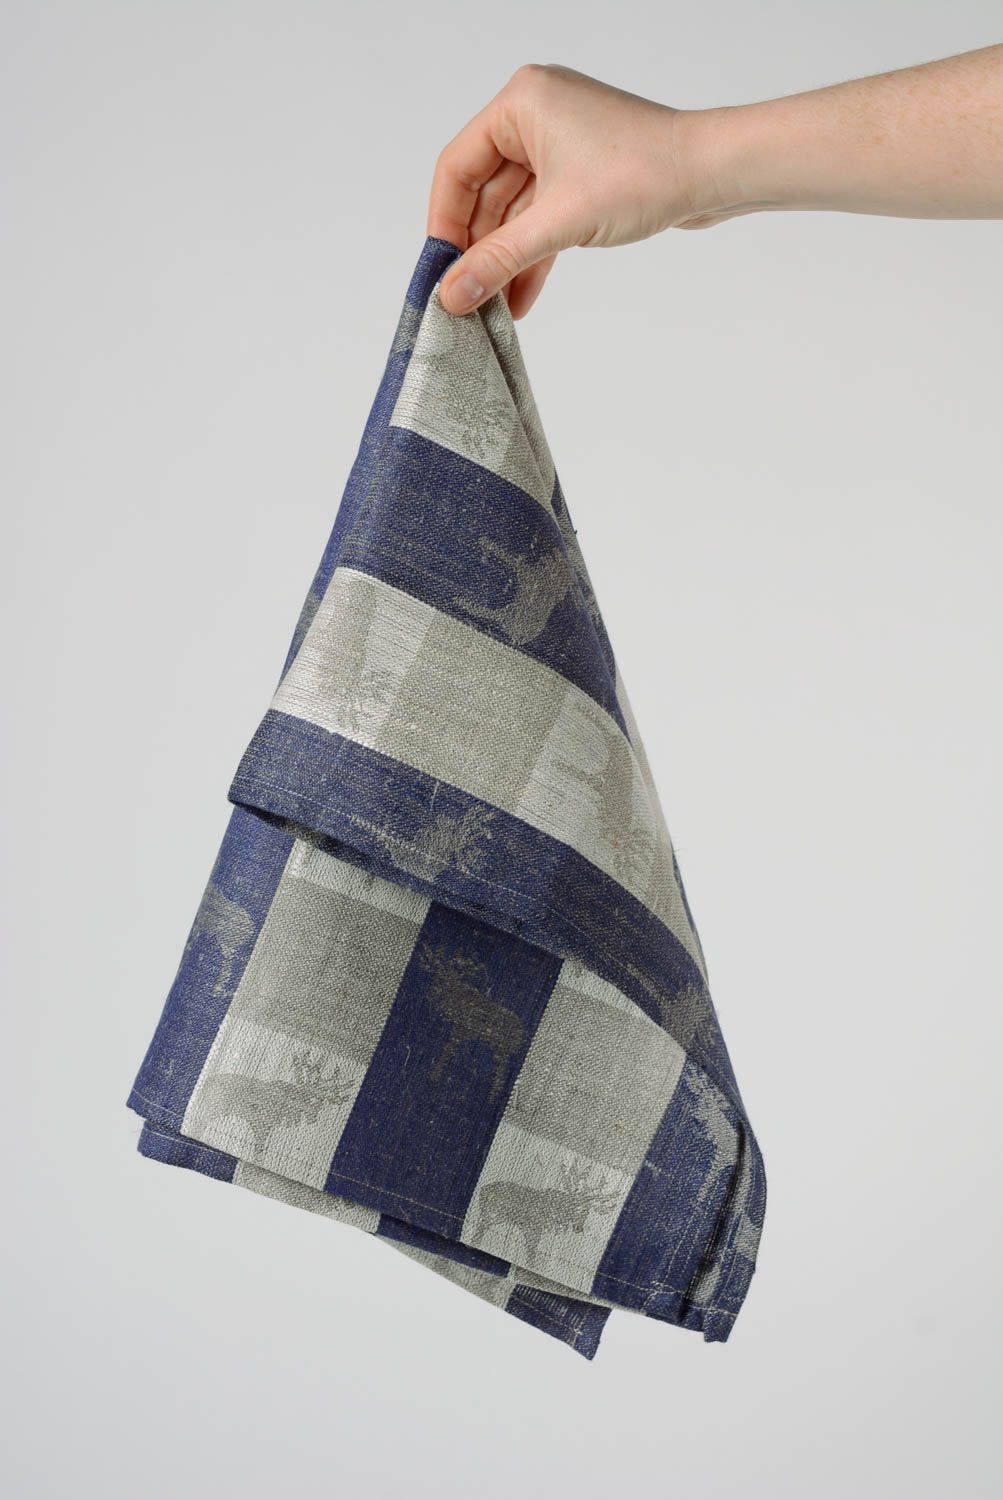 Handmade kitchen towel sewn of striped linen fabric in gray and blue colors photo 4